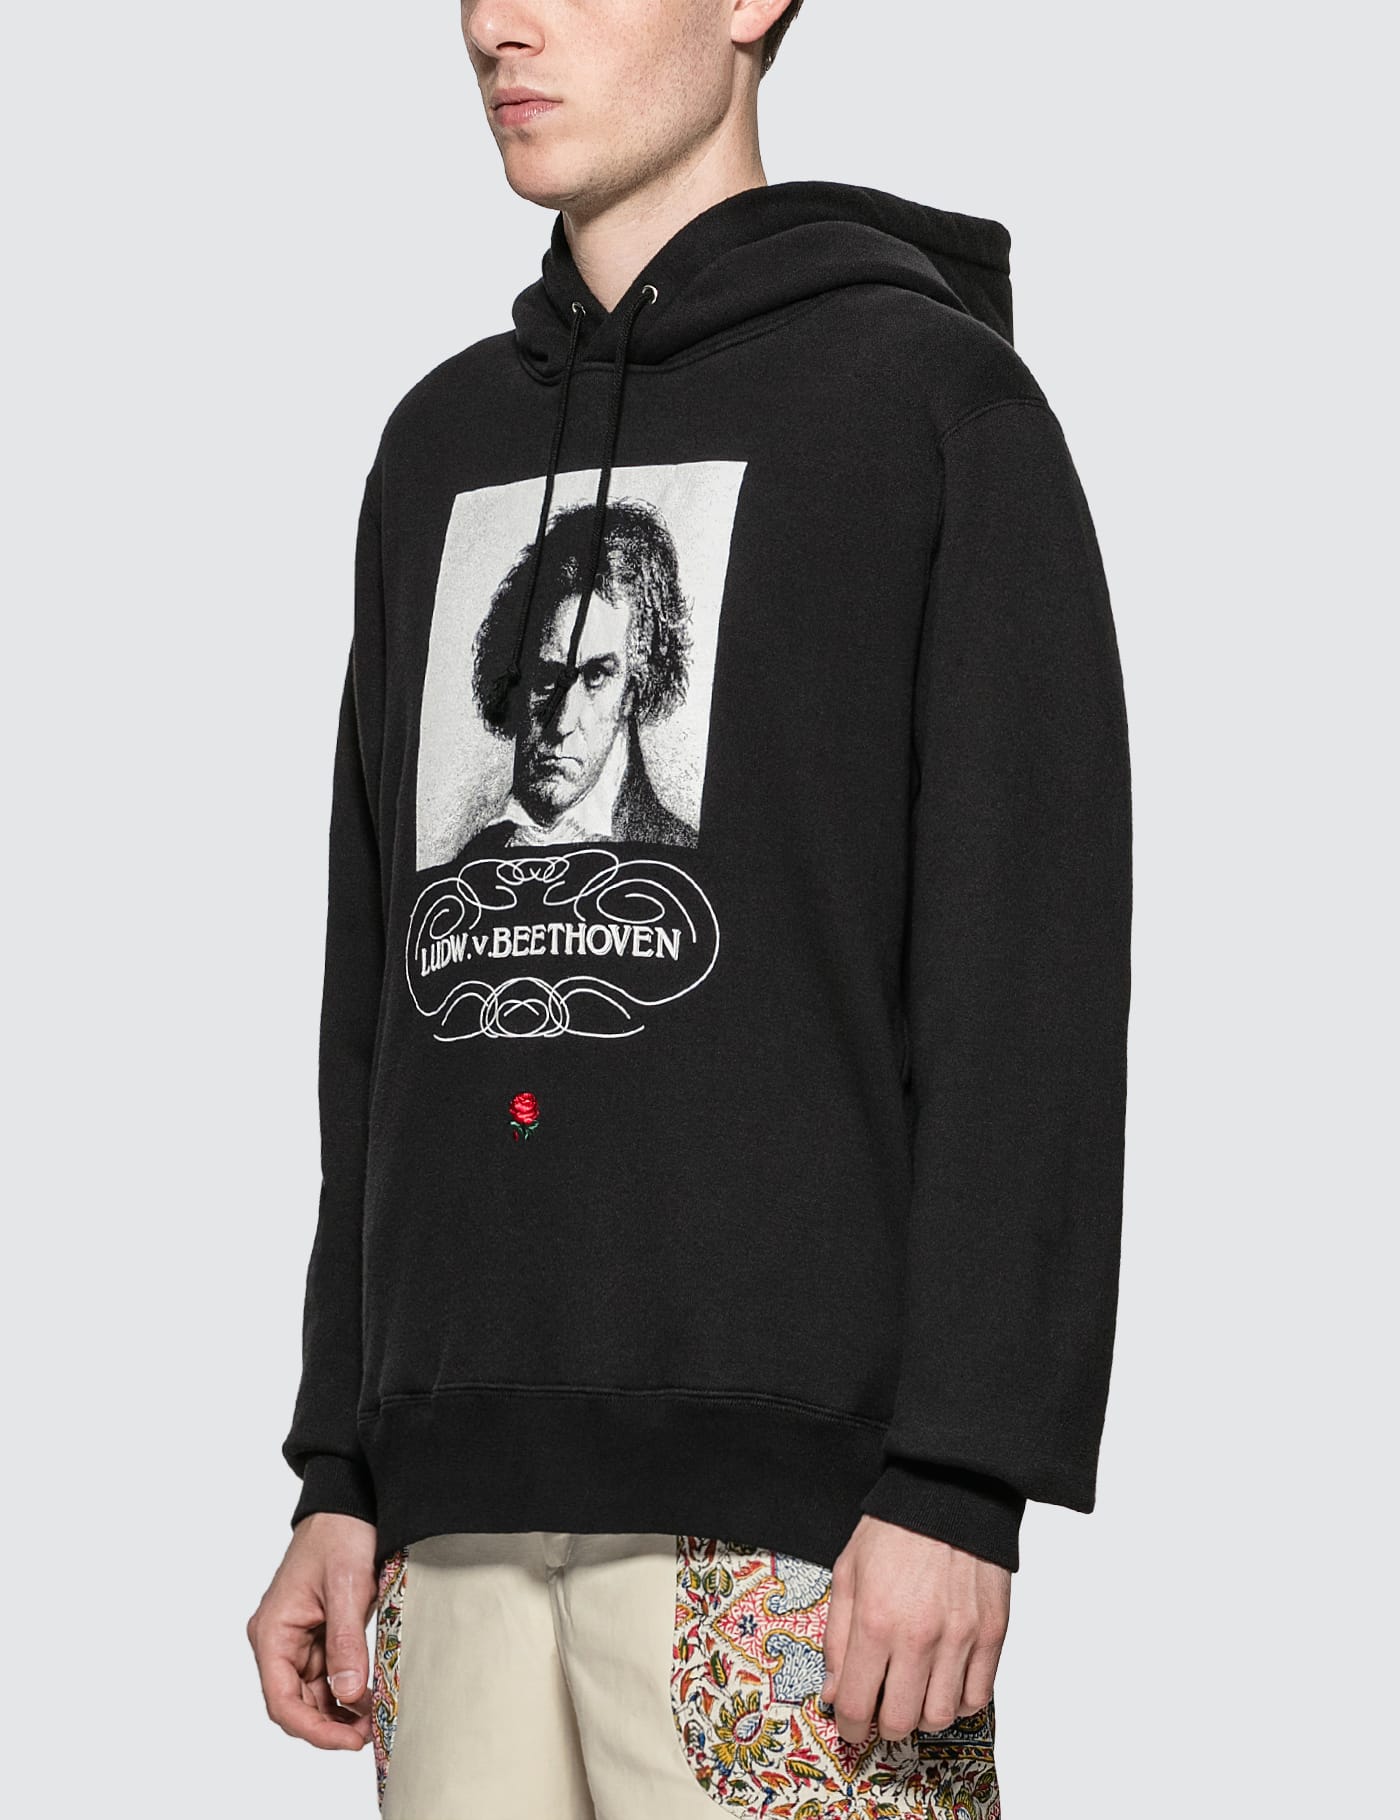 Undercover - Ludwig Van Beethoven Hoodie | HBX - Globally Curated Fashion  and Lifestyle by Hypebeast